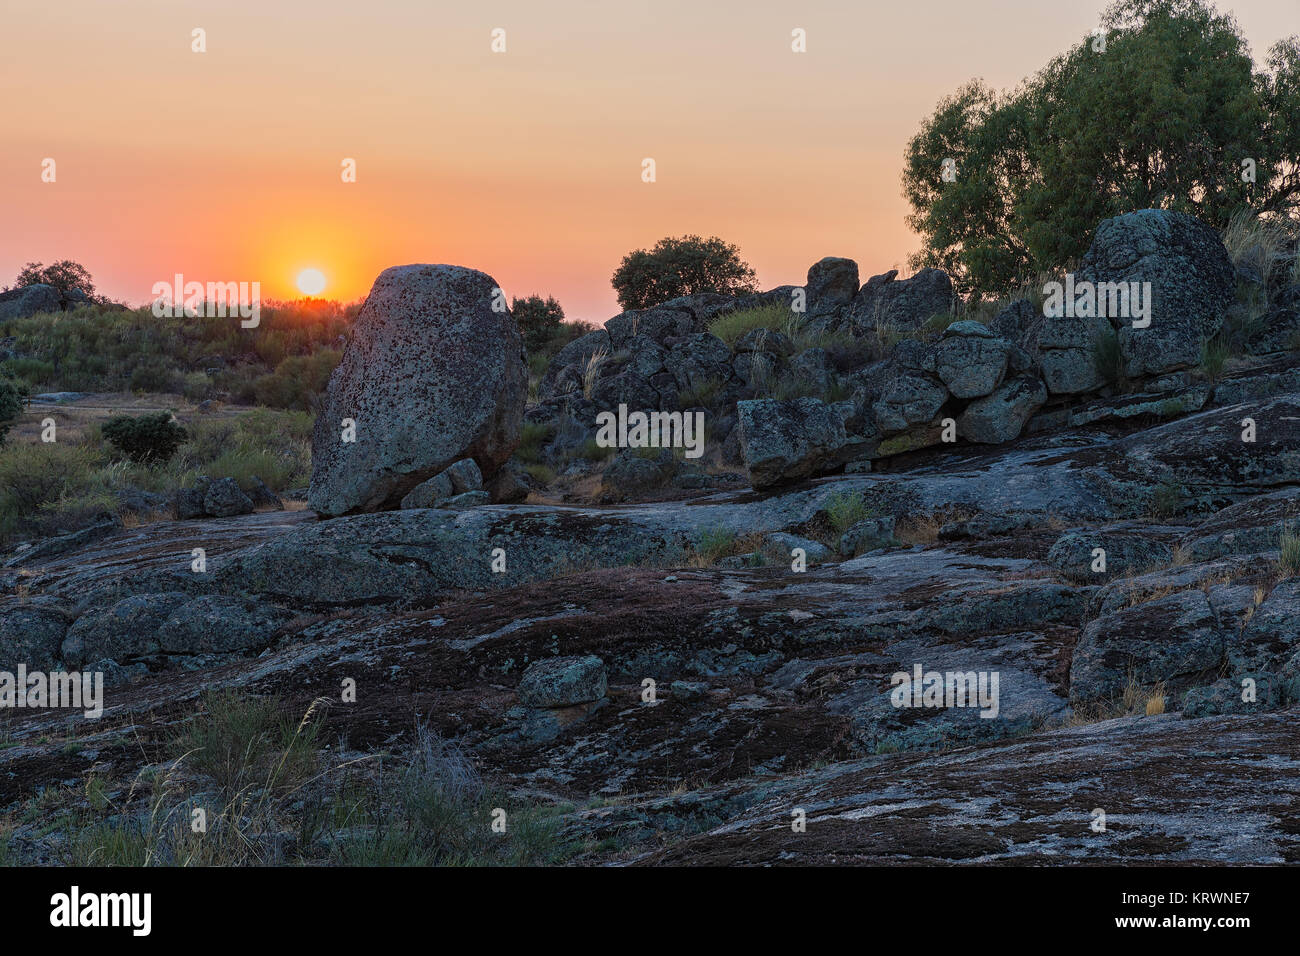 Sunset in the natural area of los Barruecos. Spain. Stock Photo